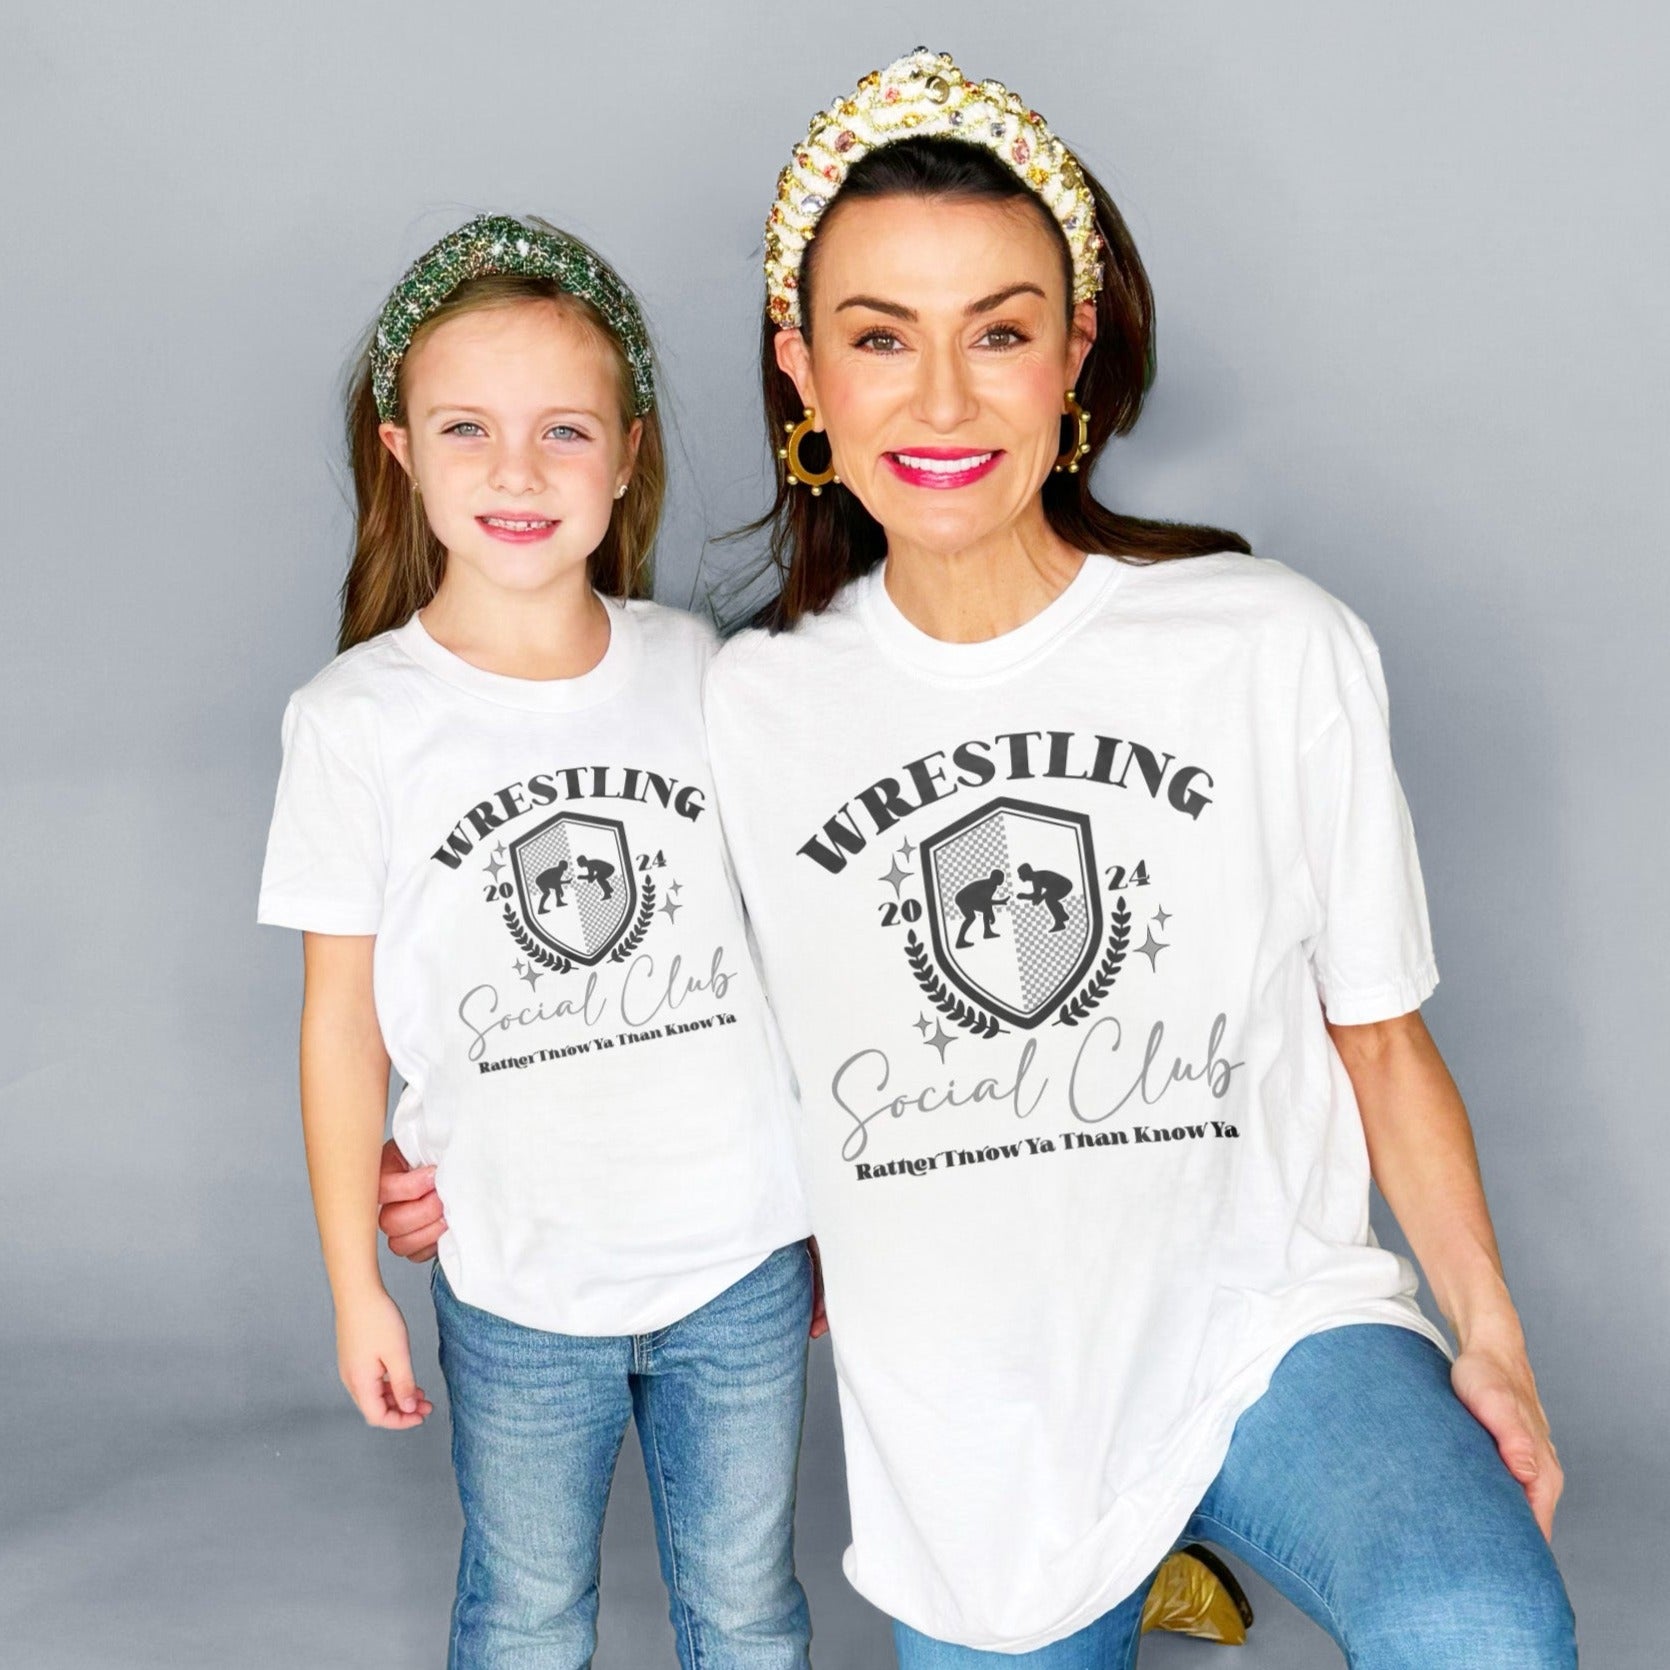 Wrestling Social Club Youth and Adult Tee